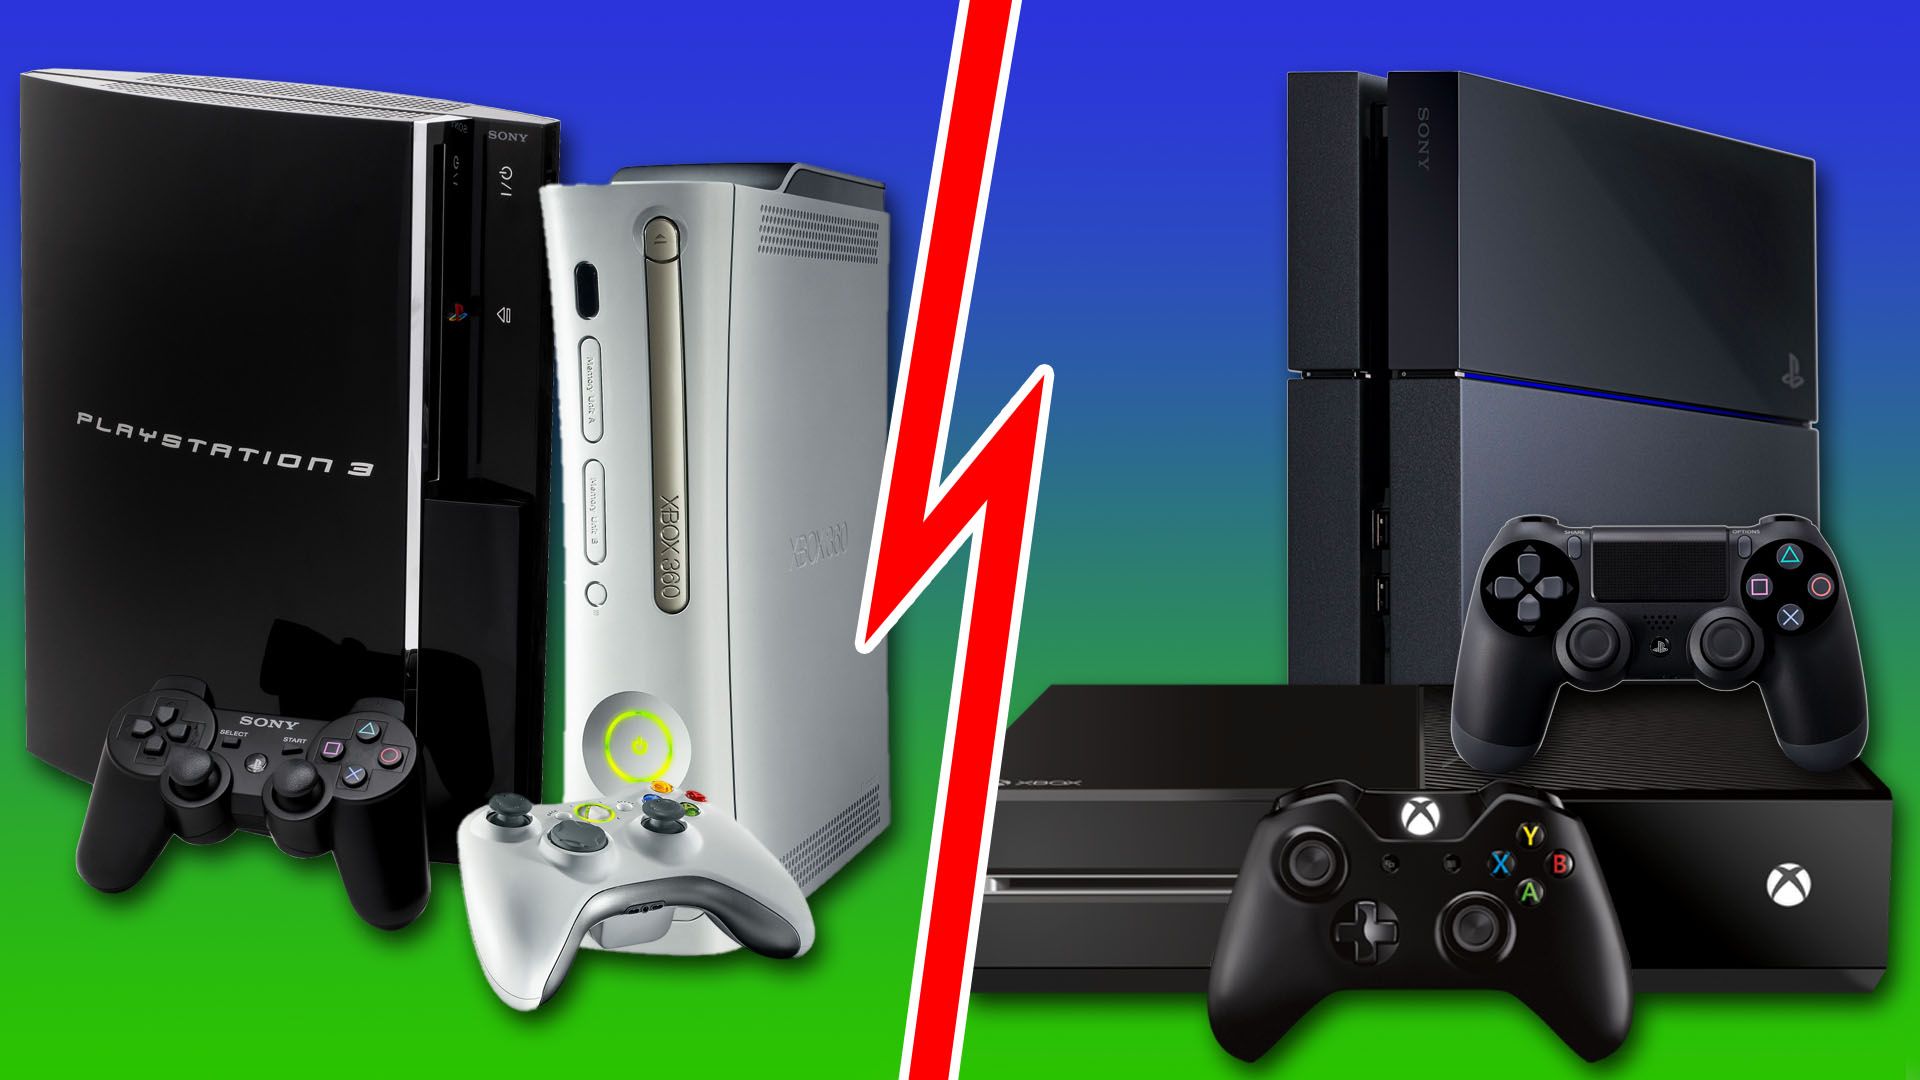 Ps4 Xbox One Vs Ps3 Xbox 360 The Outsets Of Two Generations Compared